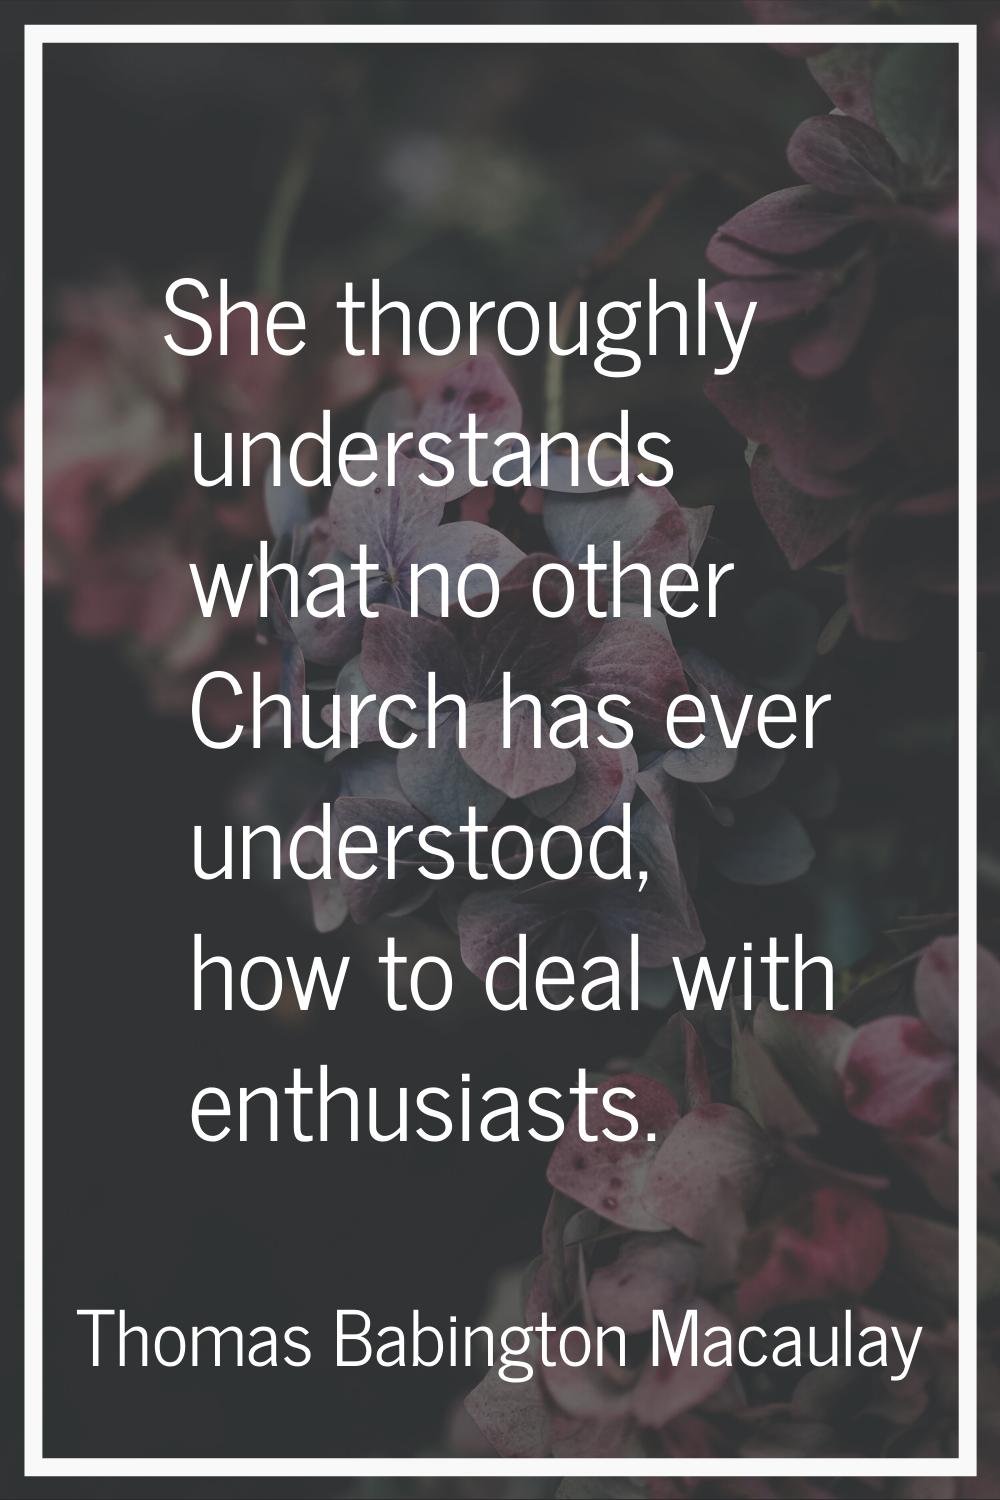 She thoroughly understands what no other Church has ever understood, how to deal with enthusiasts.